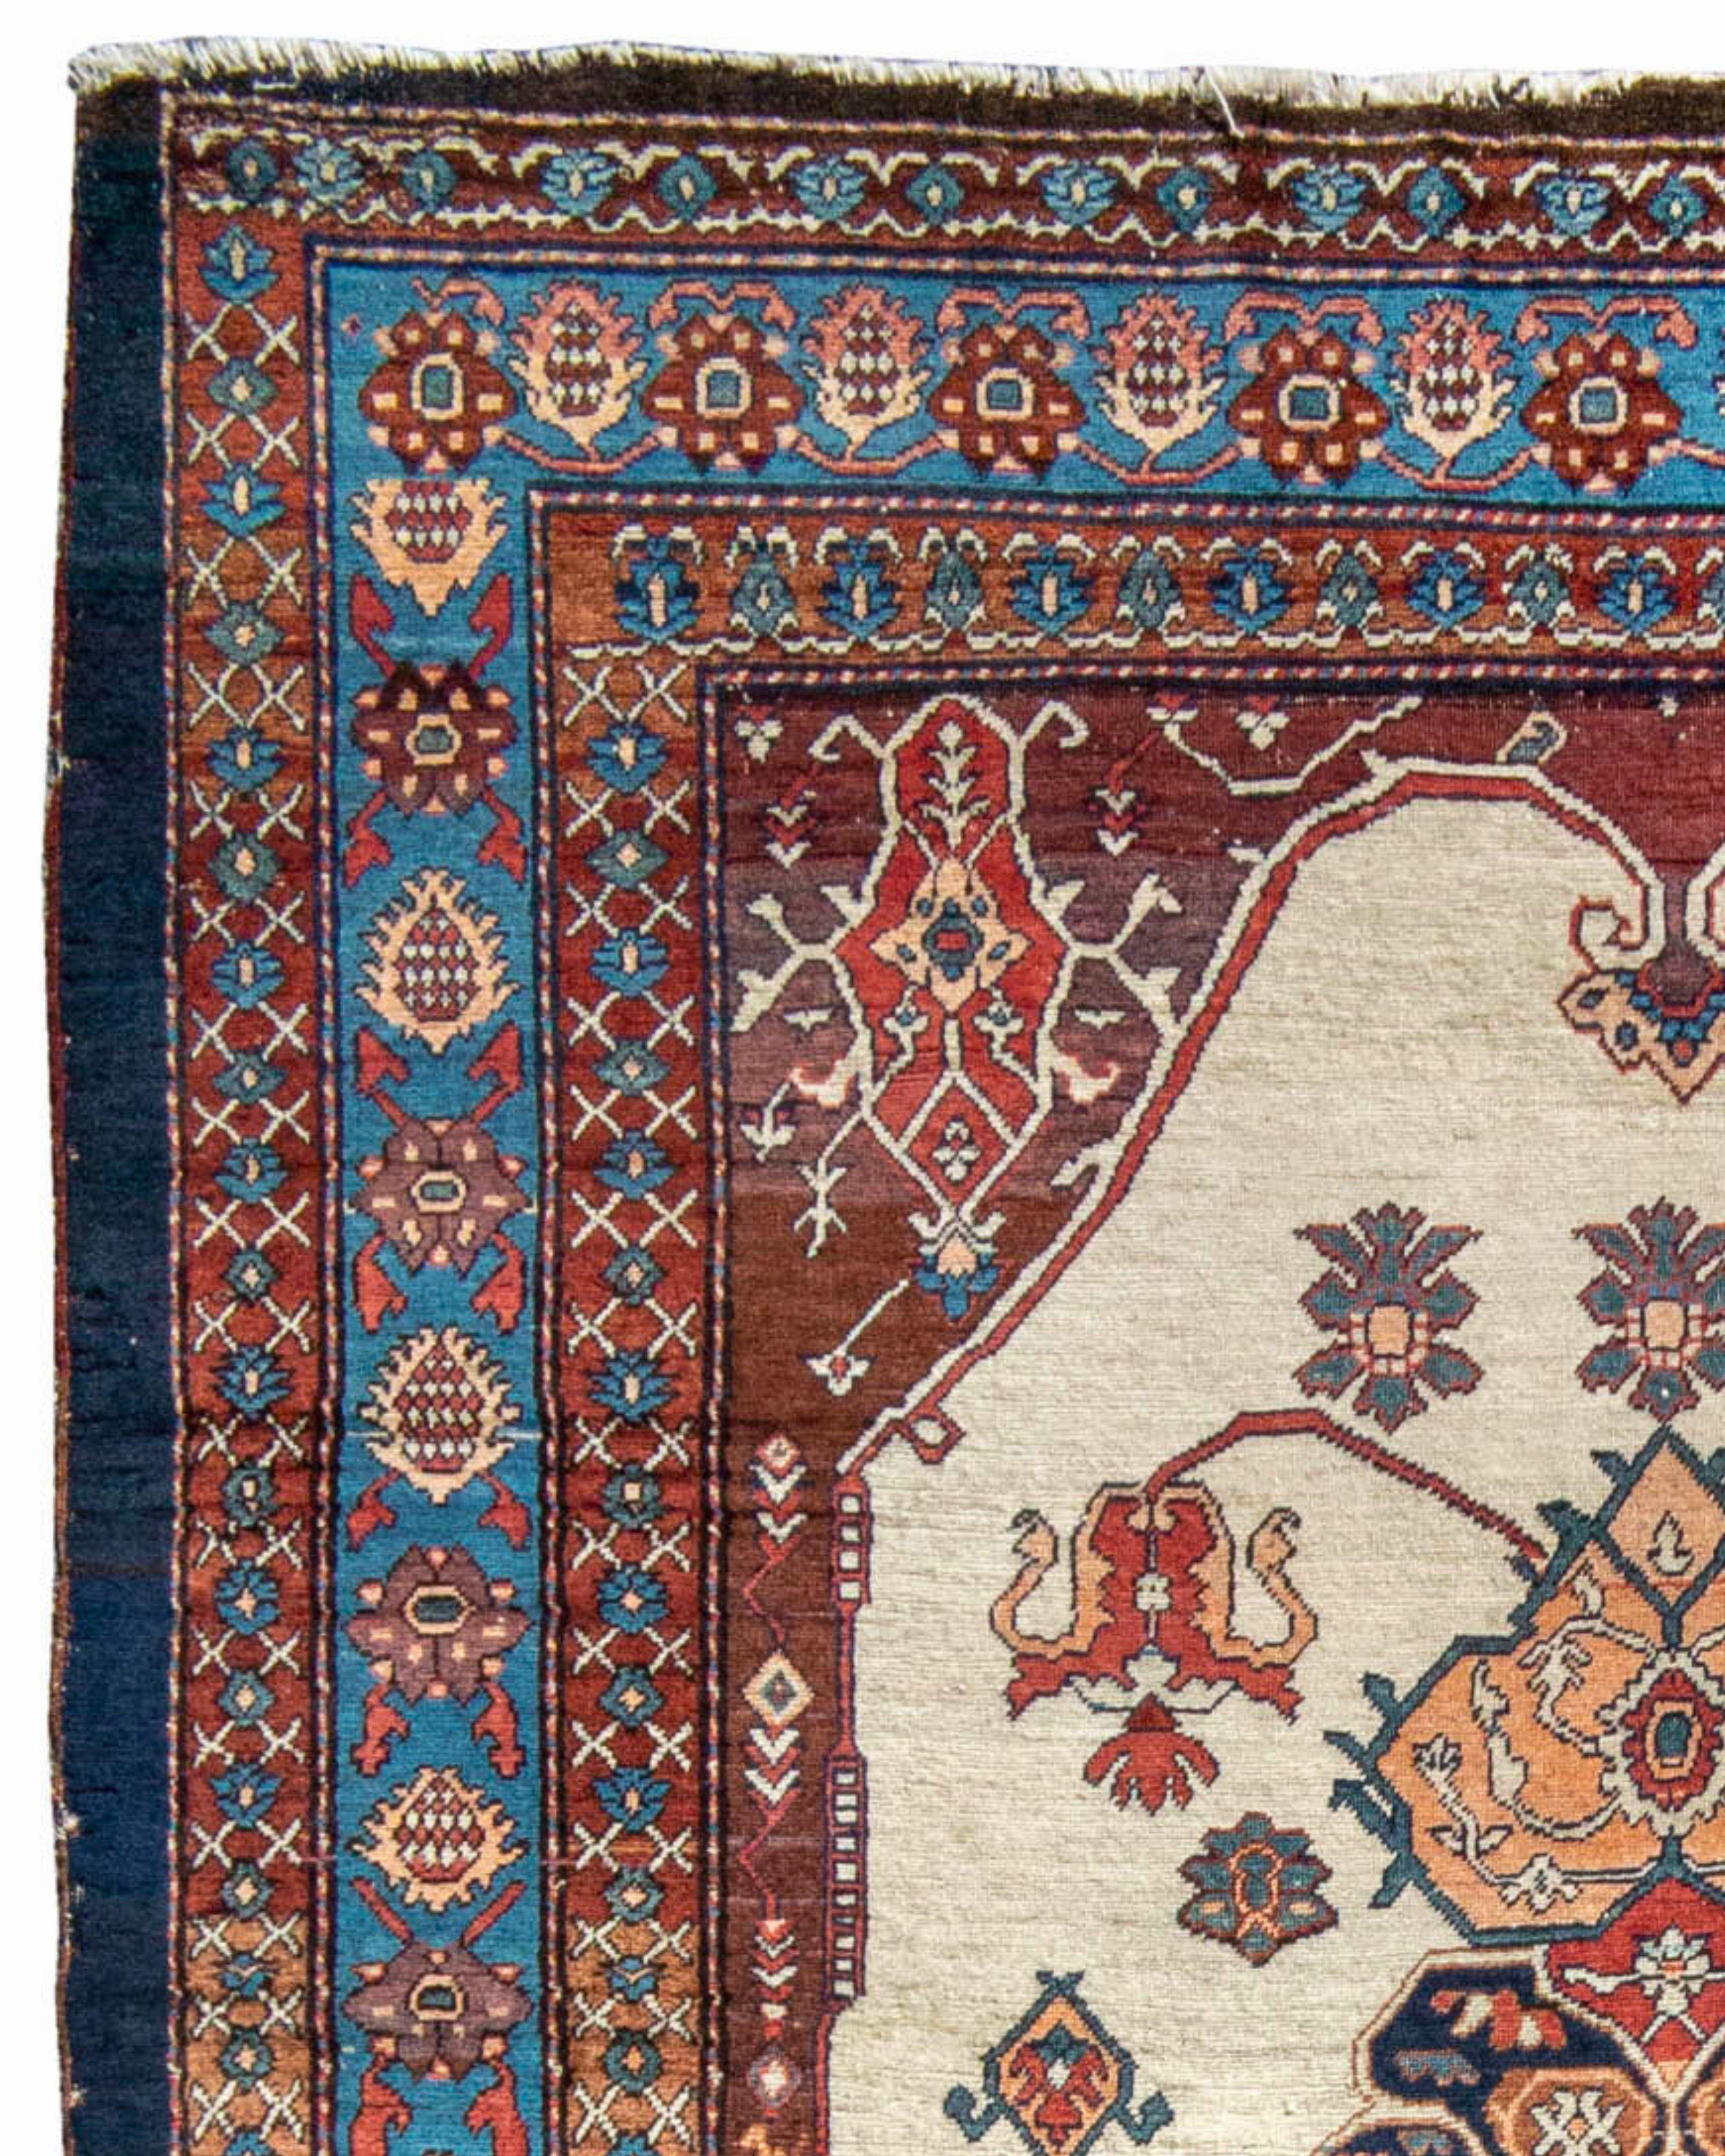 Hand-Woven Antique Persian Heriz Rug, Late 19th Century For Sale